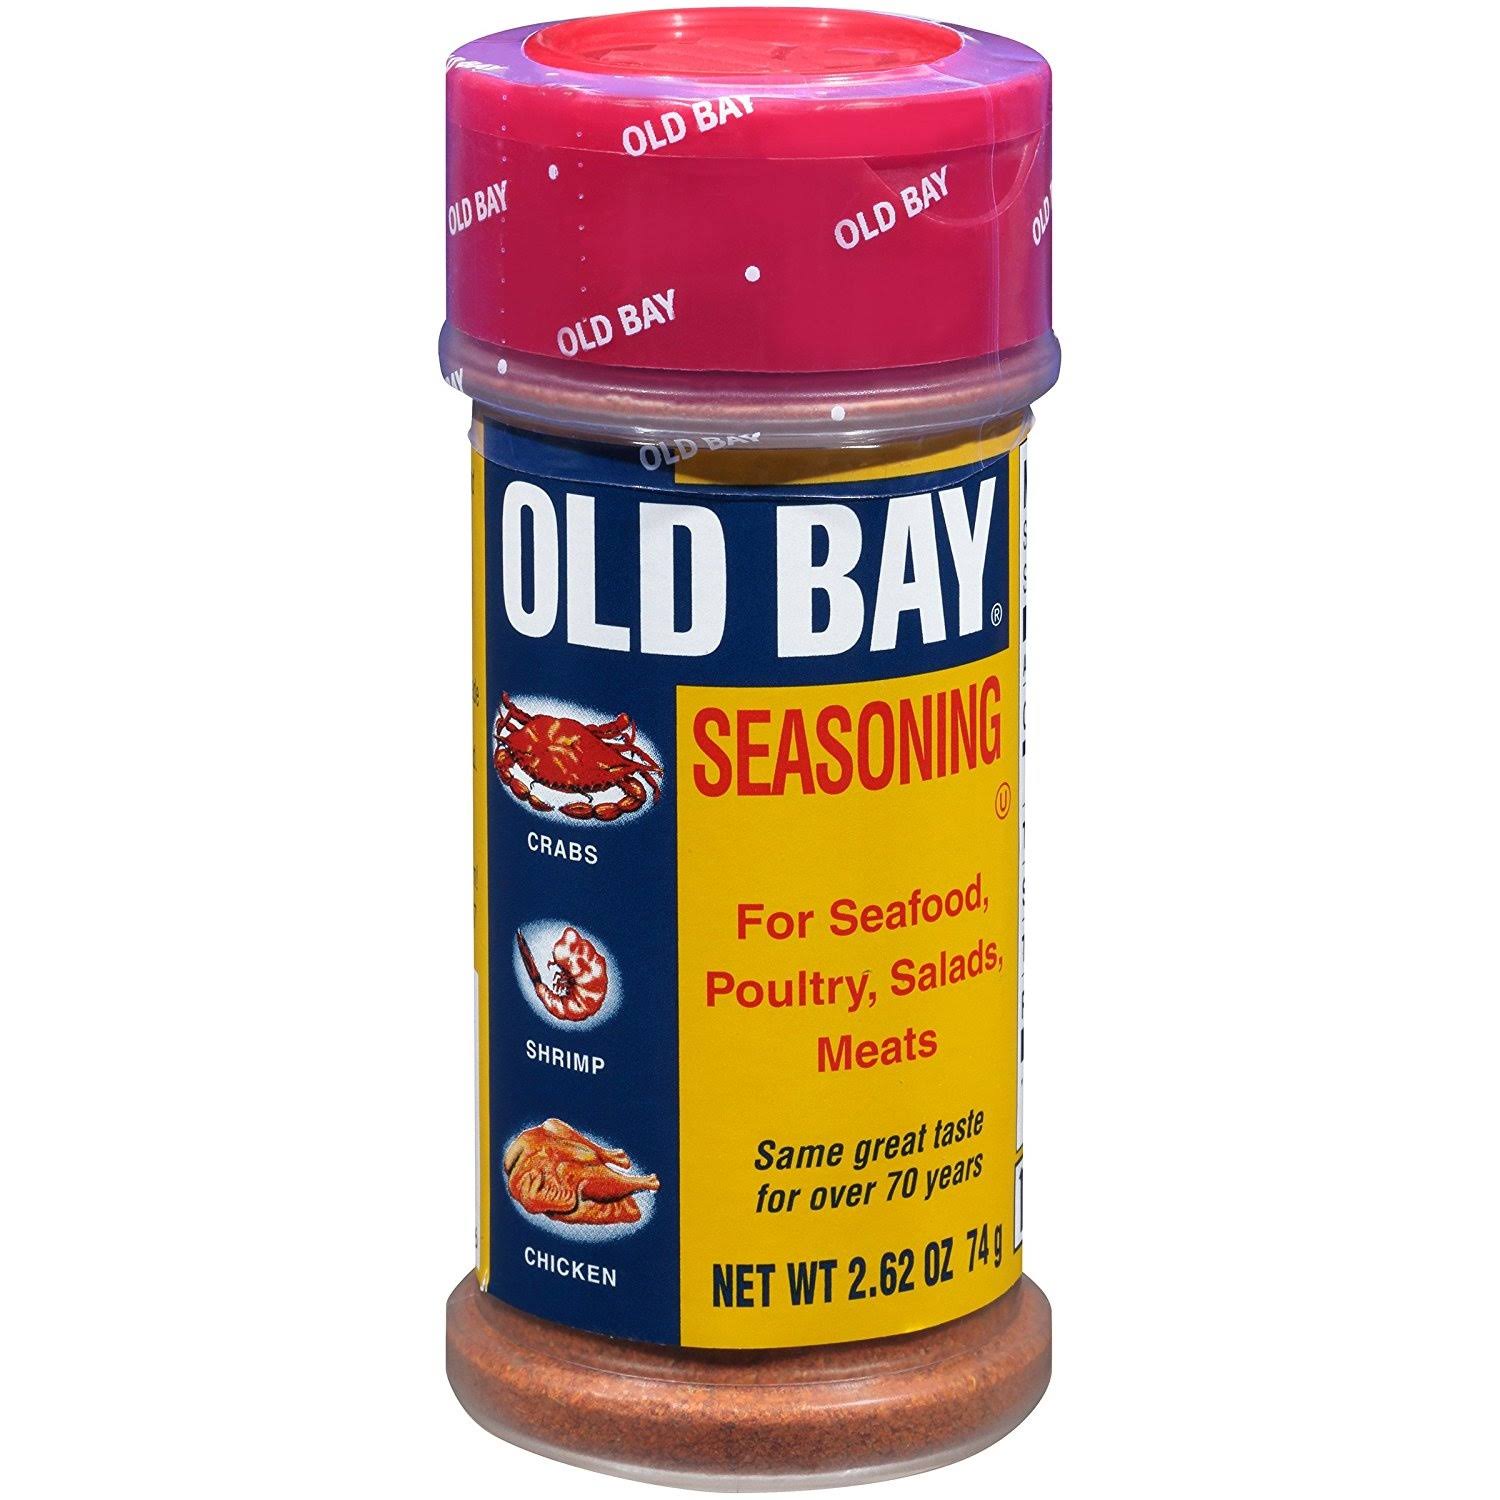 Old Bay Seasoning - for Seafood, Poultry, Salads And Meats, 2.62oz